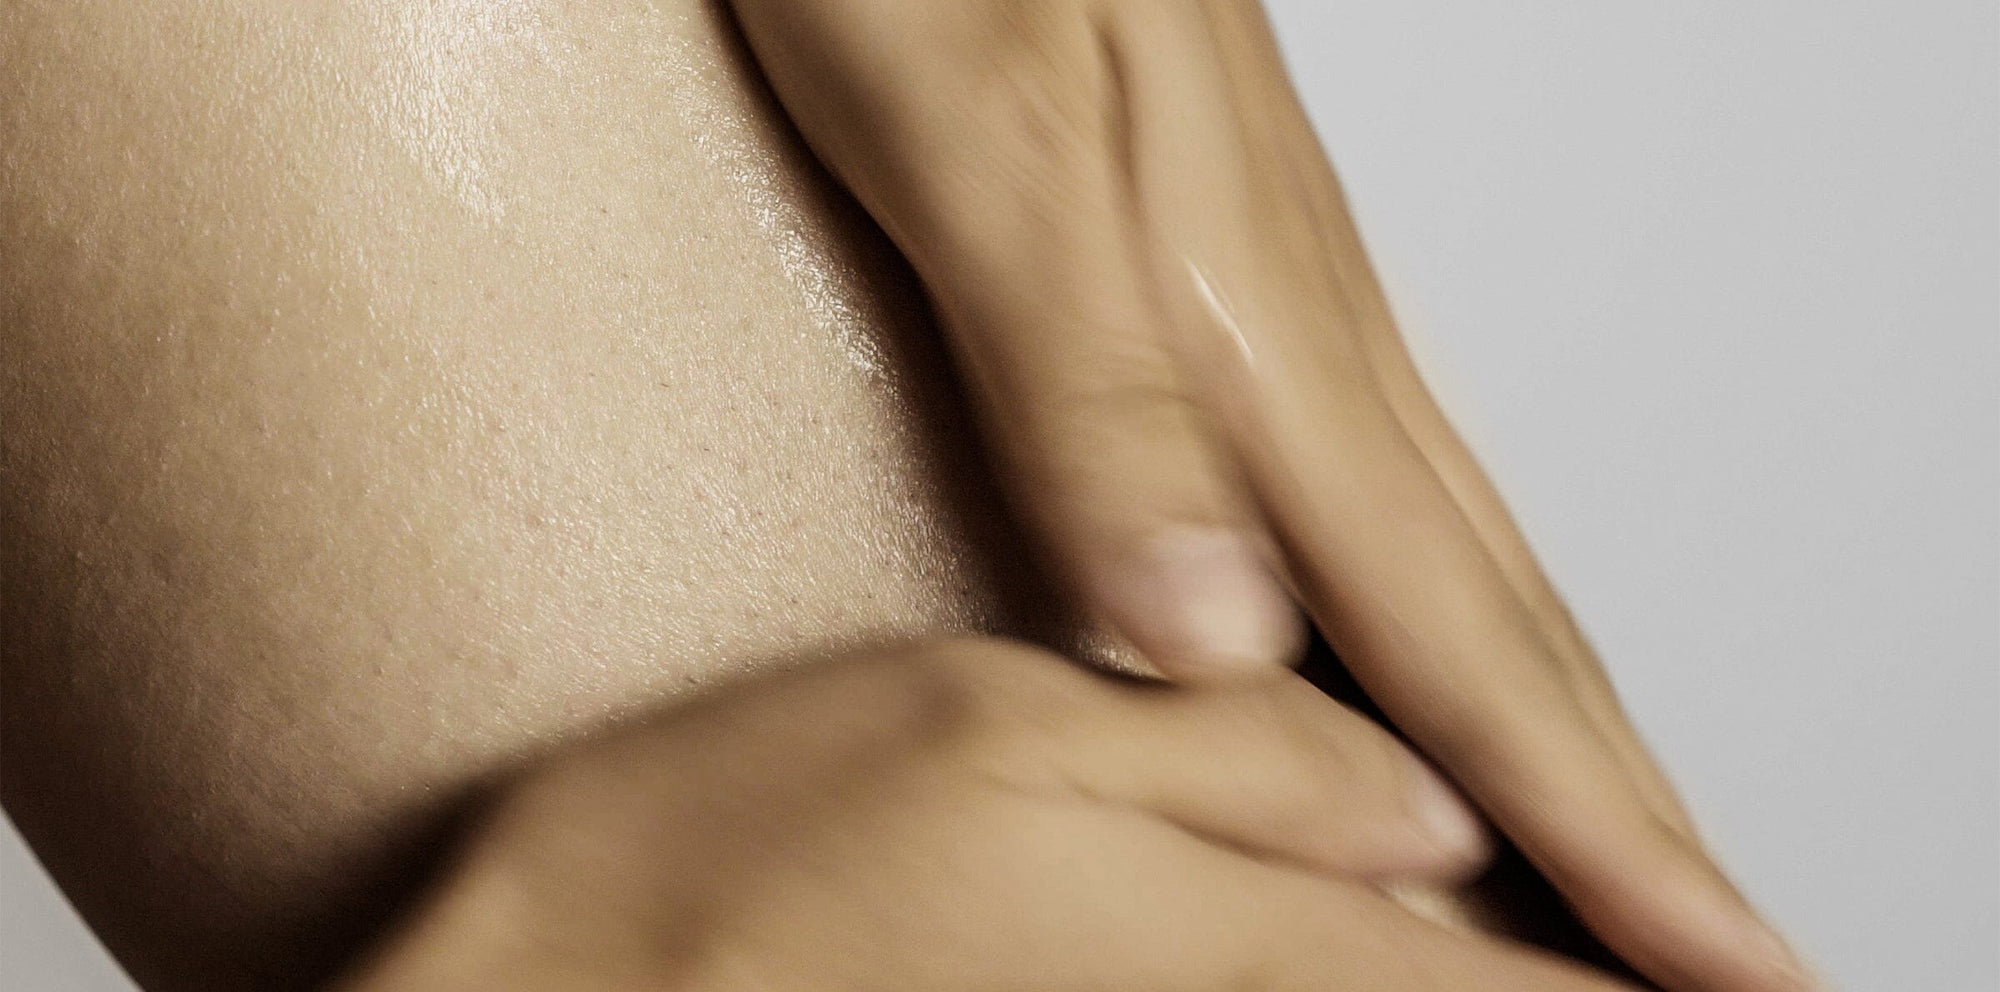 7 Tips to Prep the Skin for Waxing